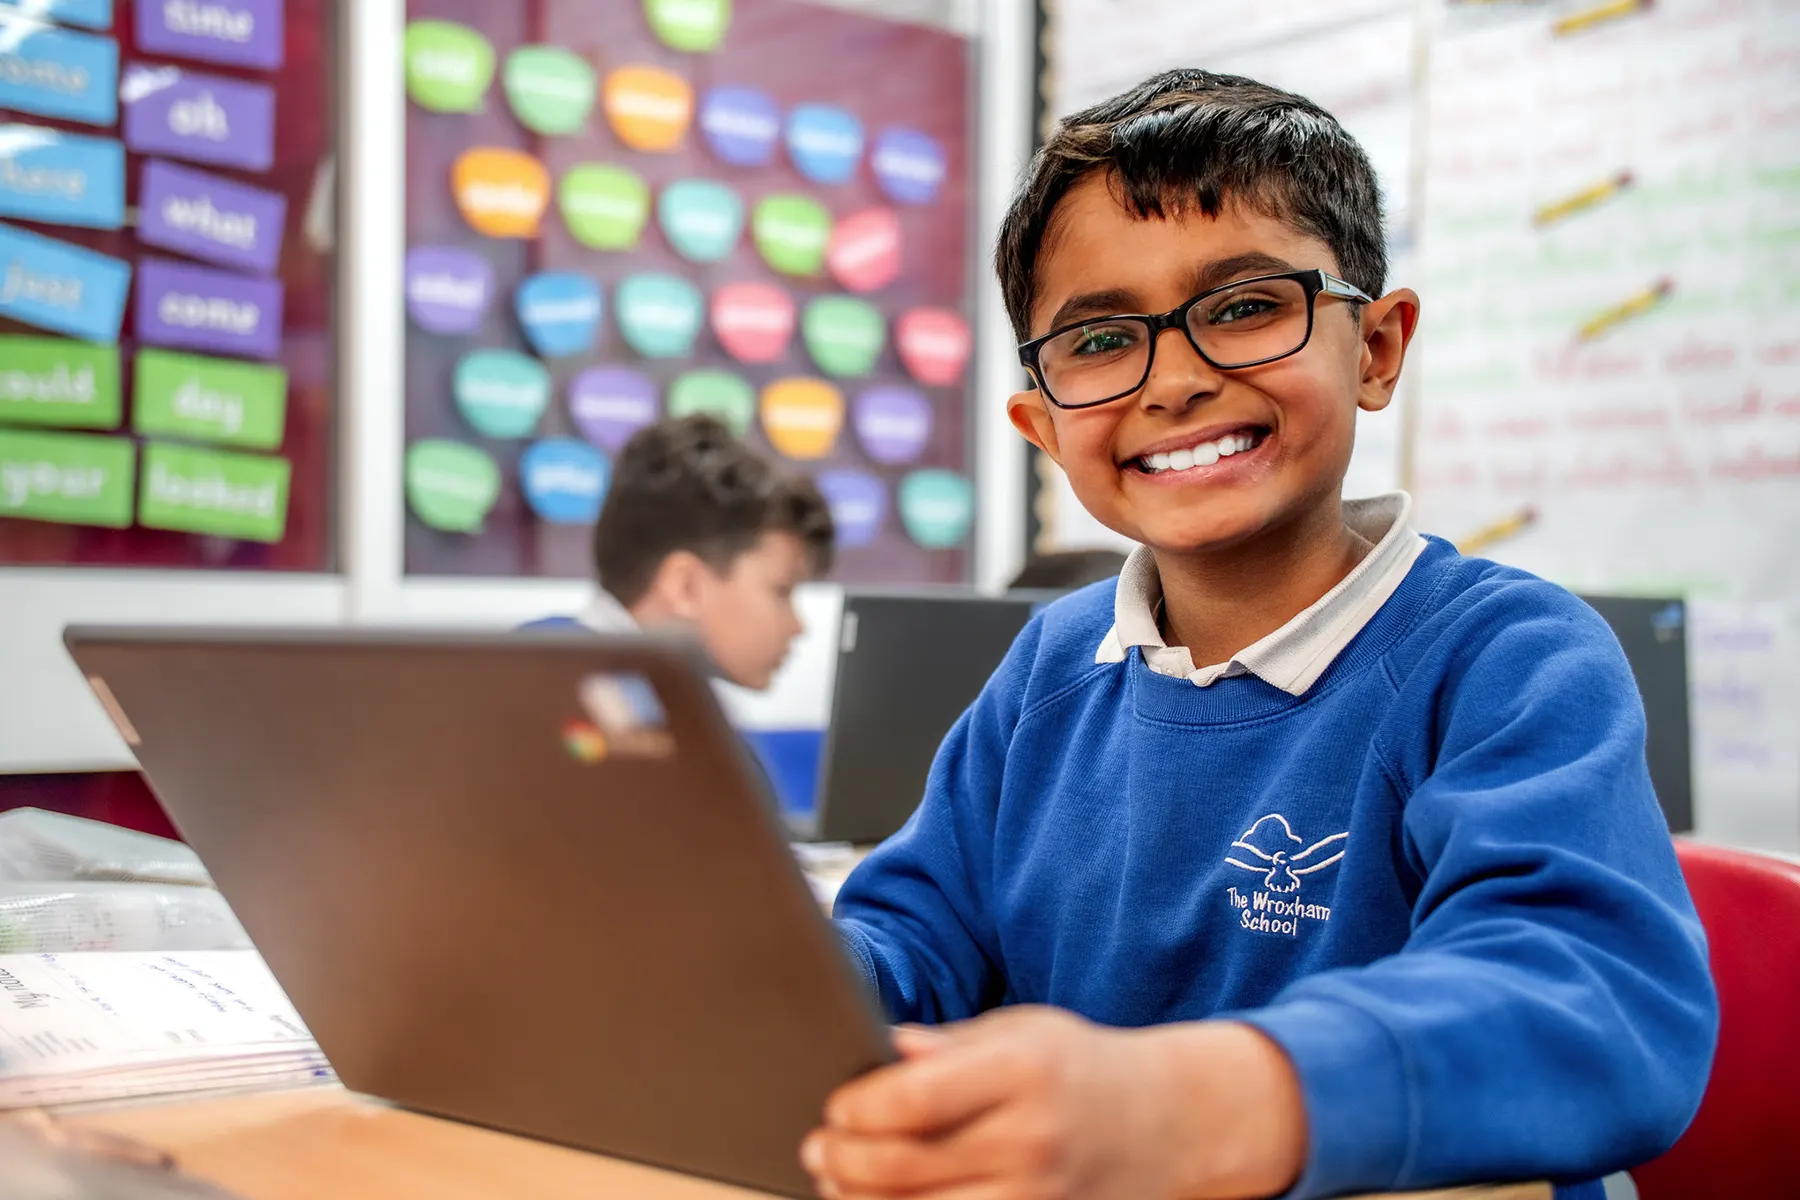 A boy on a laptop in class smiling